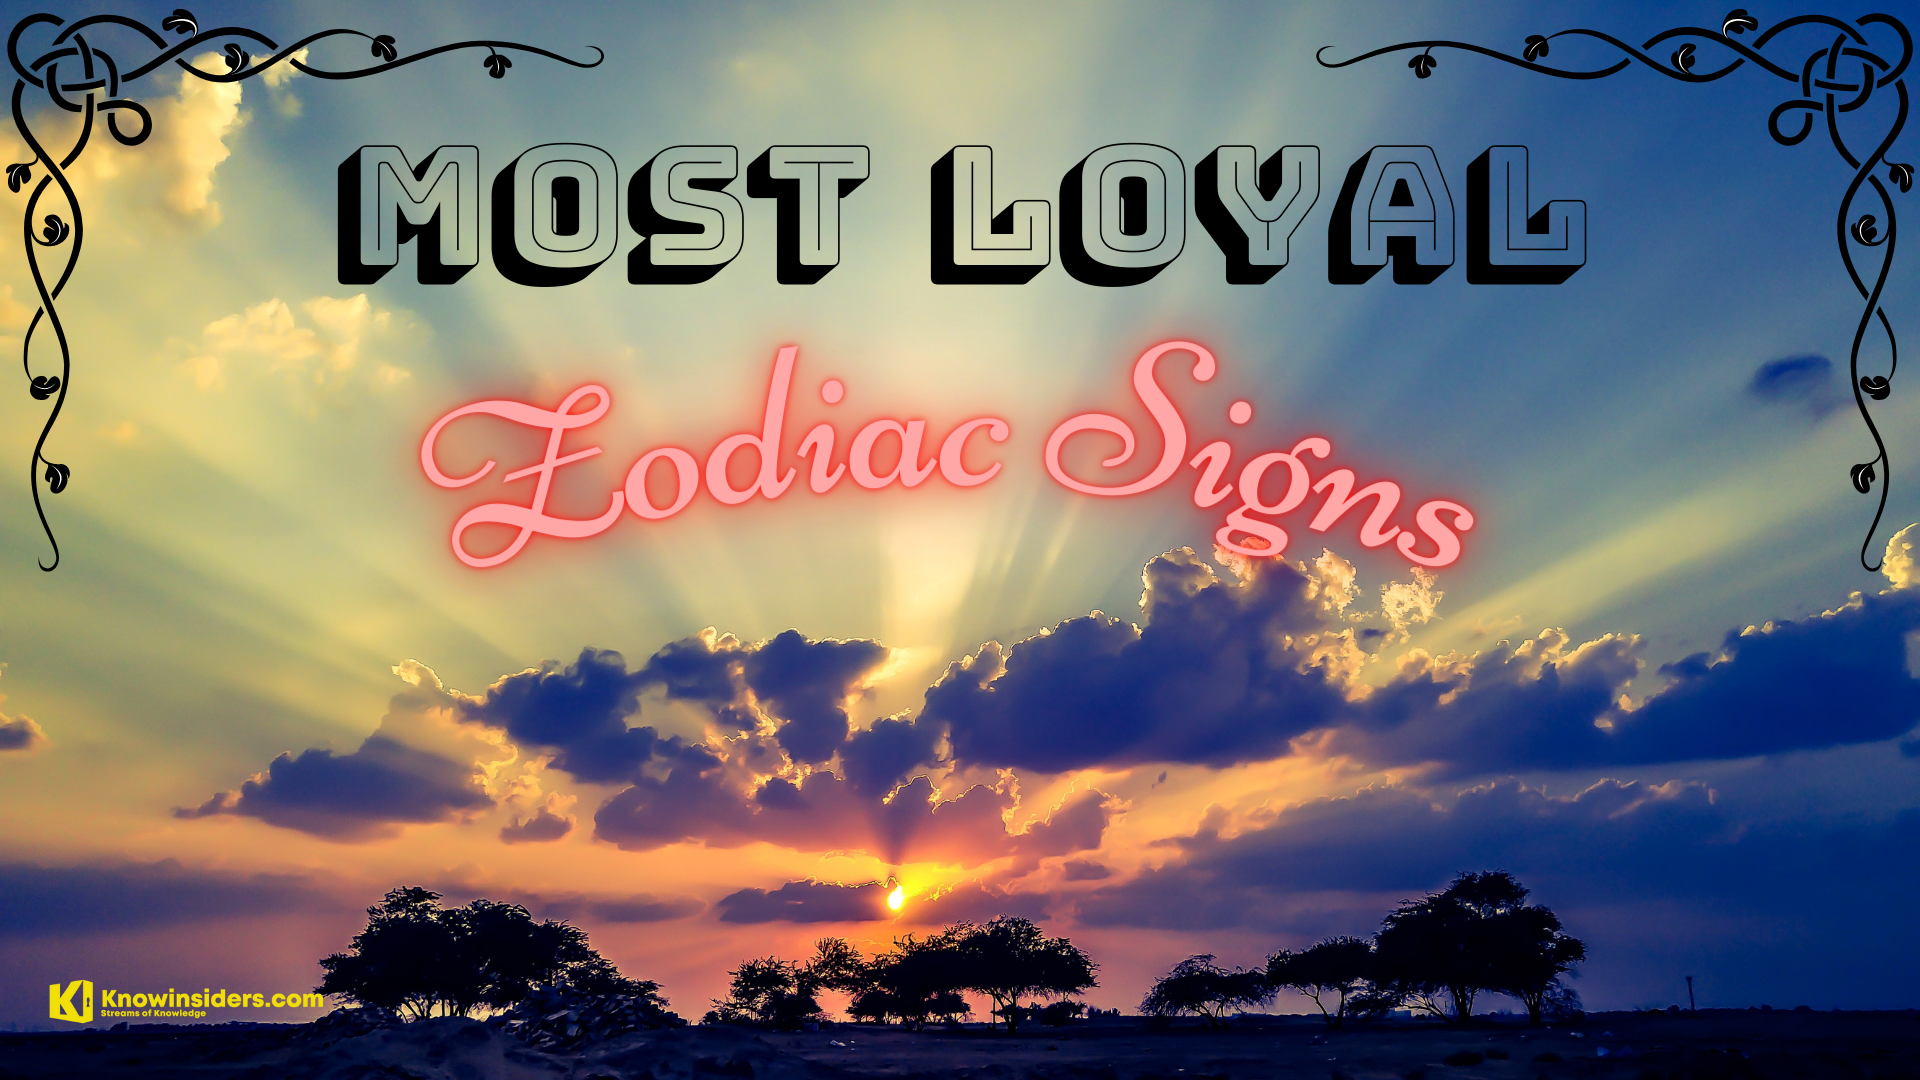 Top 5 Most Loyal Zodiac Signs According To Astrology